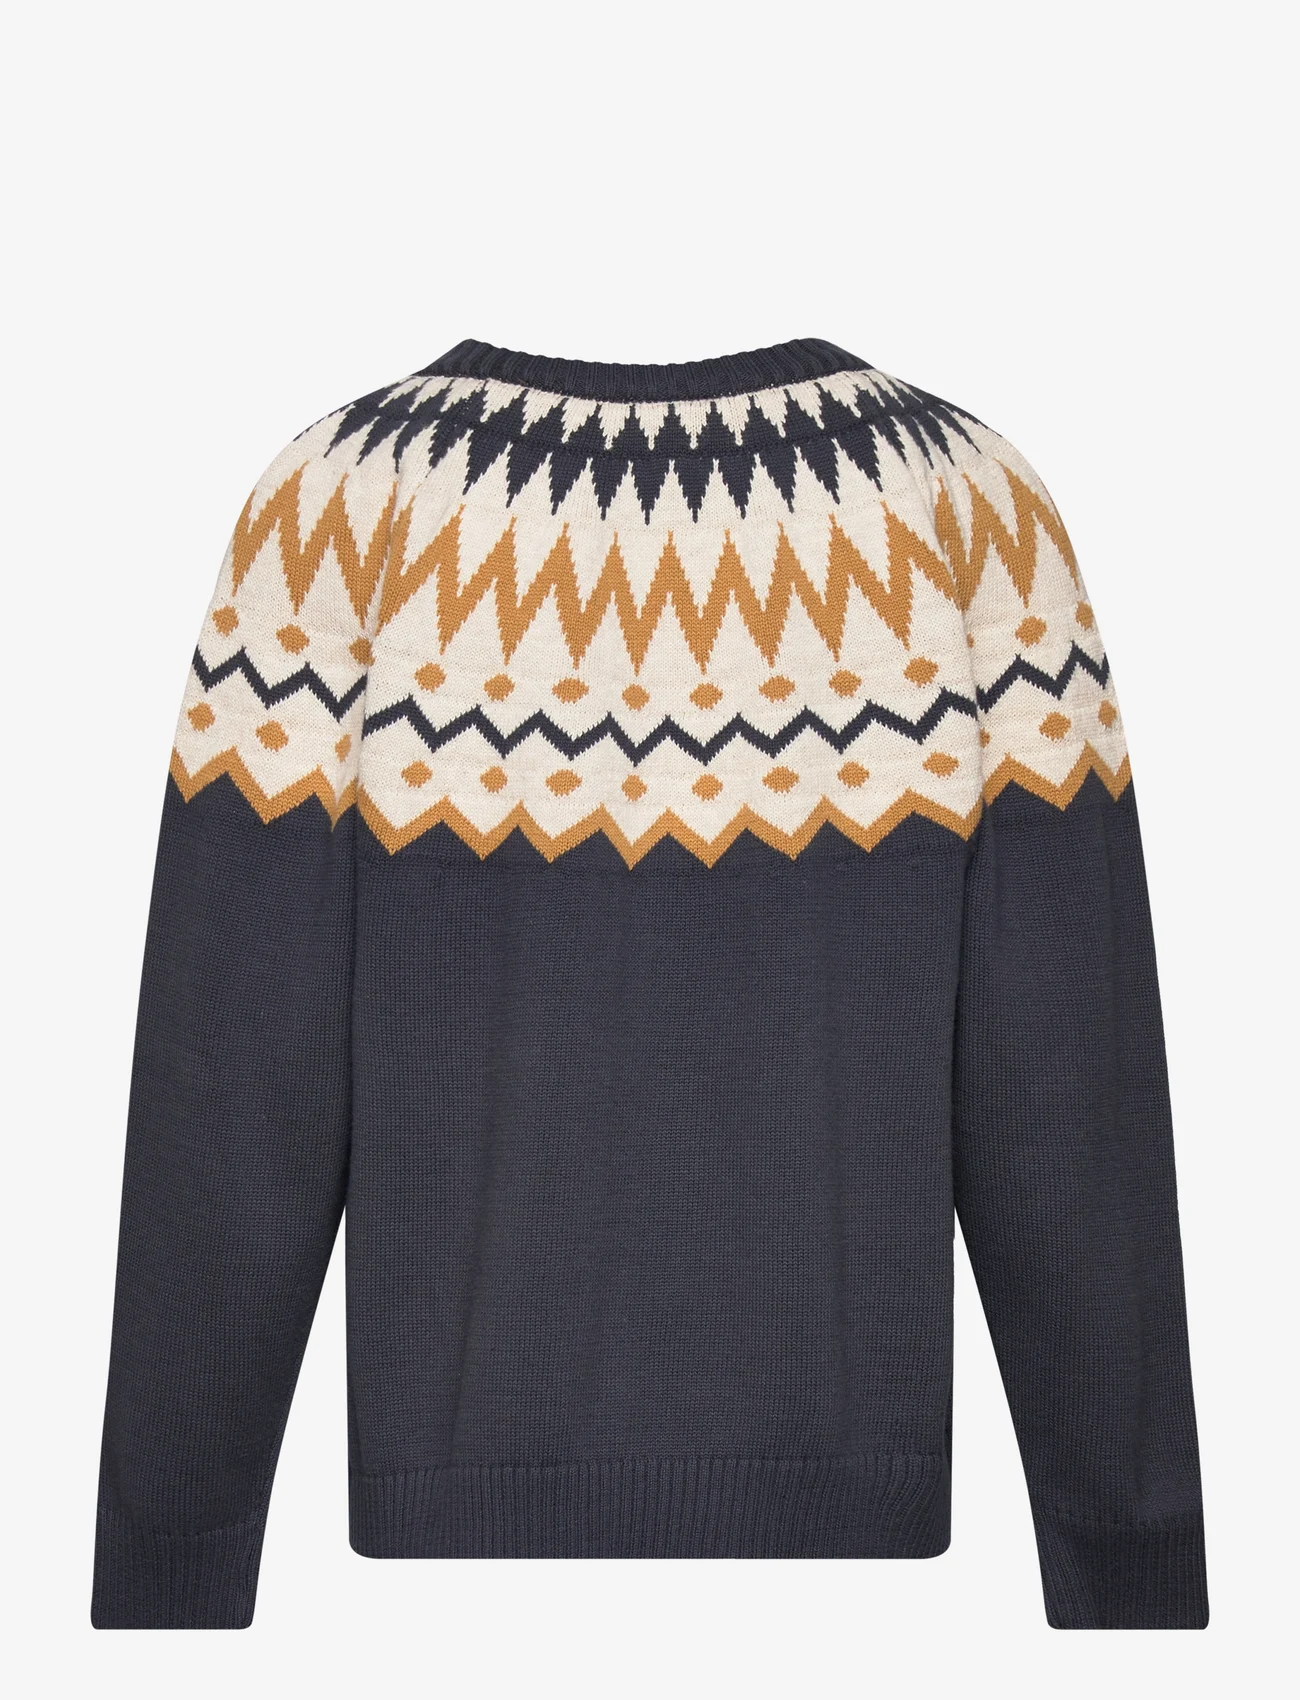 Hust & Claire - Porter - Pullover - jumpers - blue night - 1